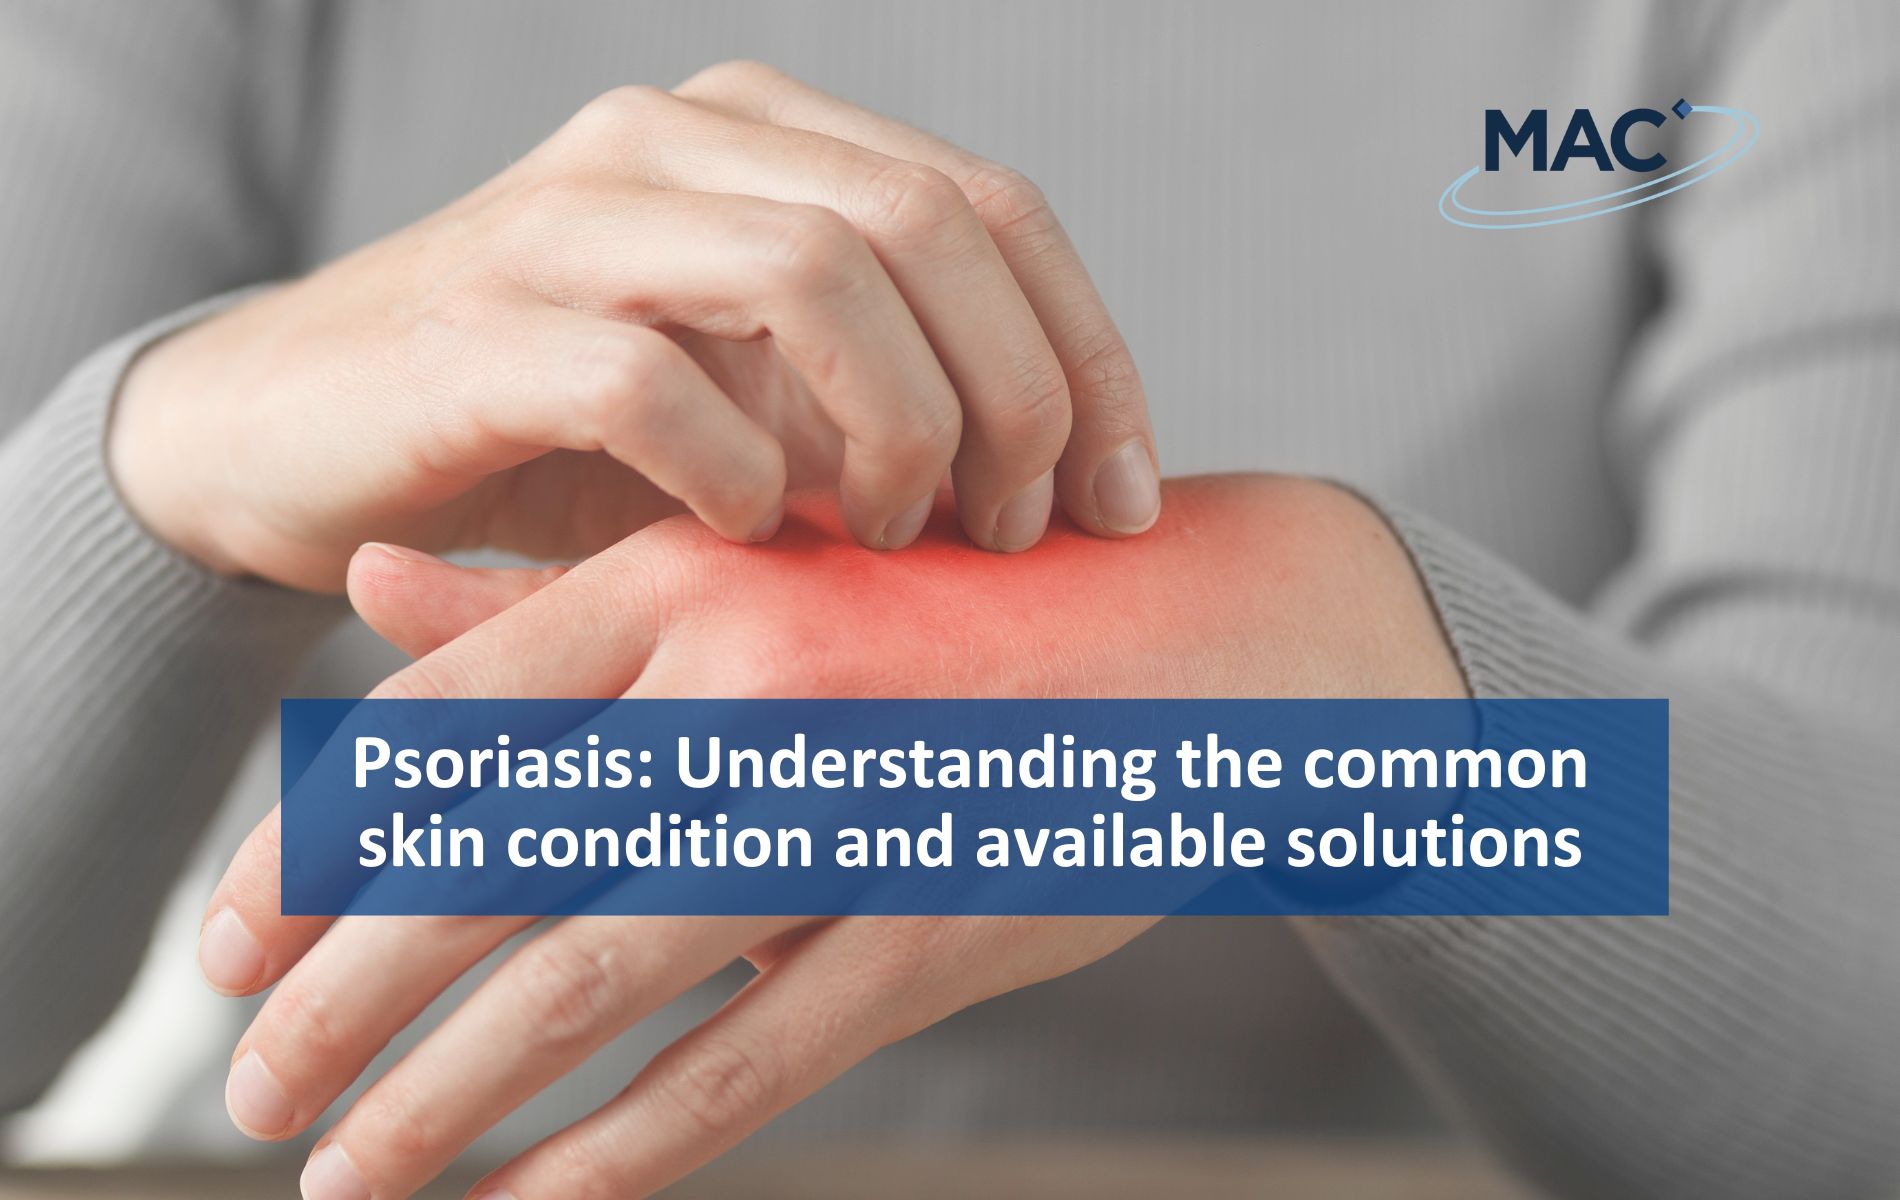 Psoriasis: Understanding the common skin condition and available solutions